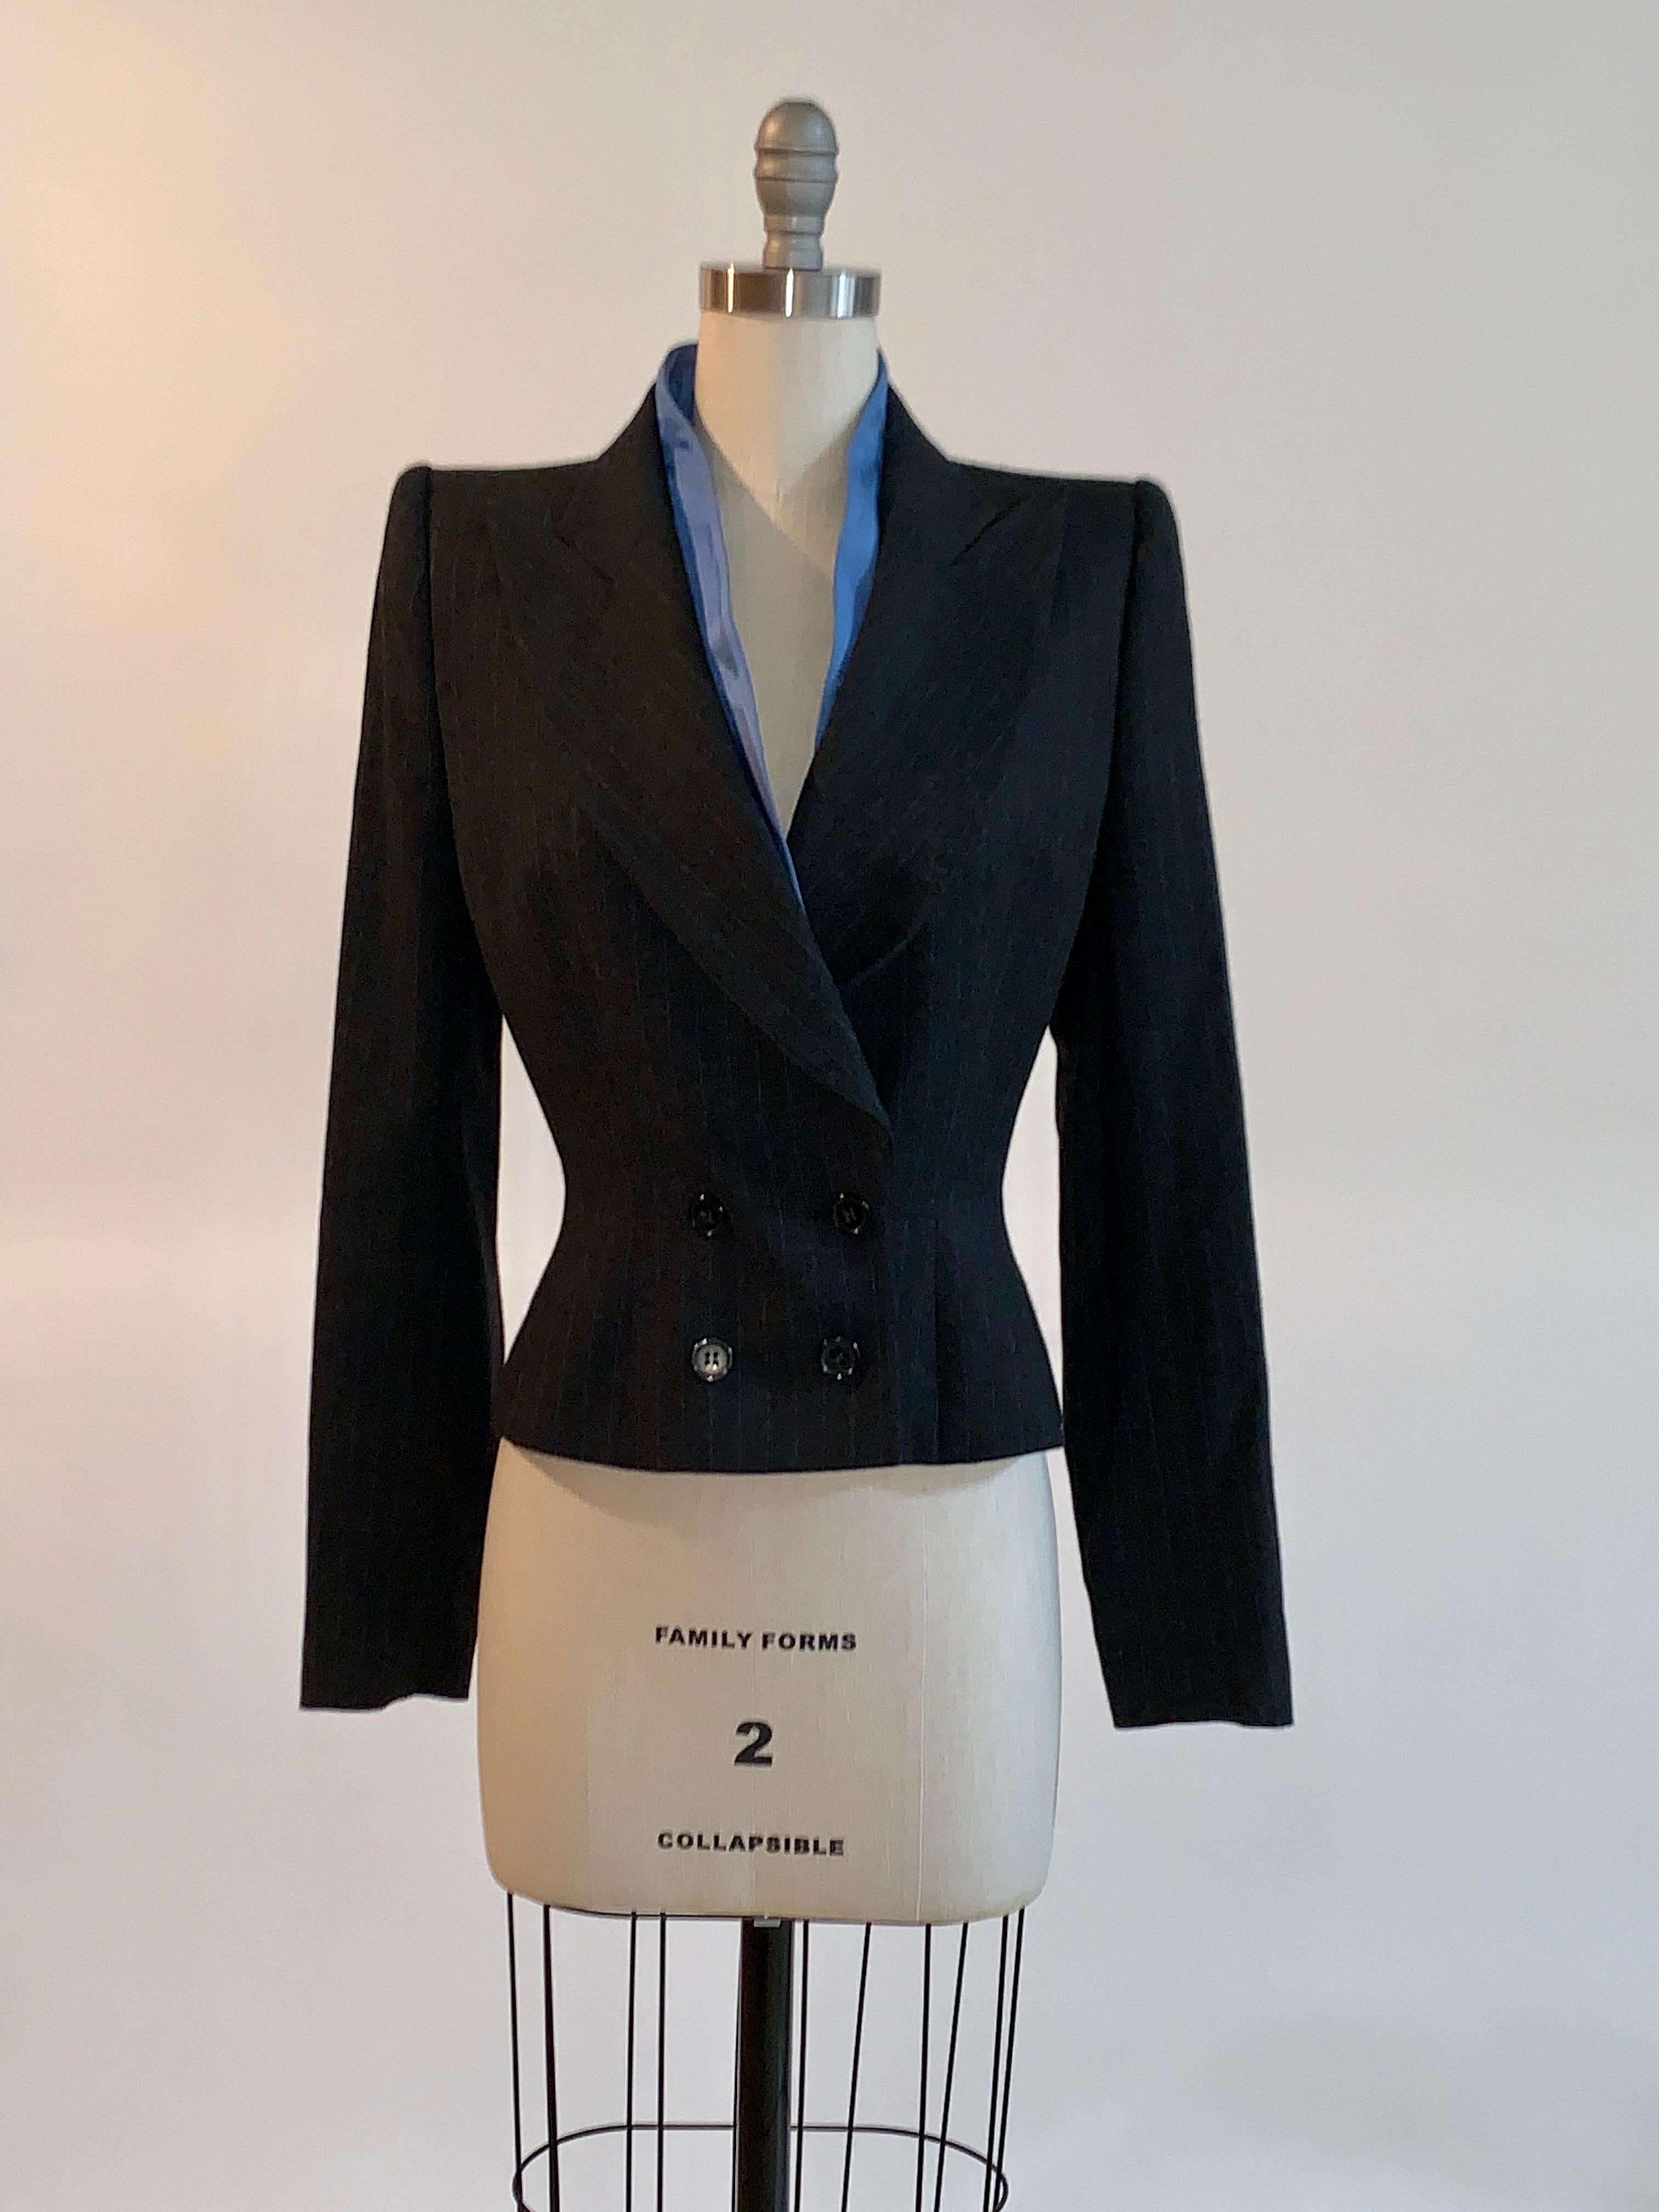 Alexander McQueen vintage 1990s charcoal grey (close to black) and blue pinstripe blazer. Structured padded shoulders, silk trim peeks out around collar. Buttons at front, three buttons at each cuff. As seen in Look 20 of McQueen's Fall 1997 runway